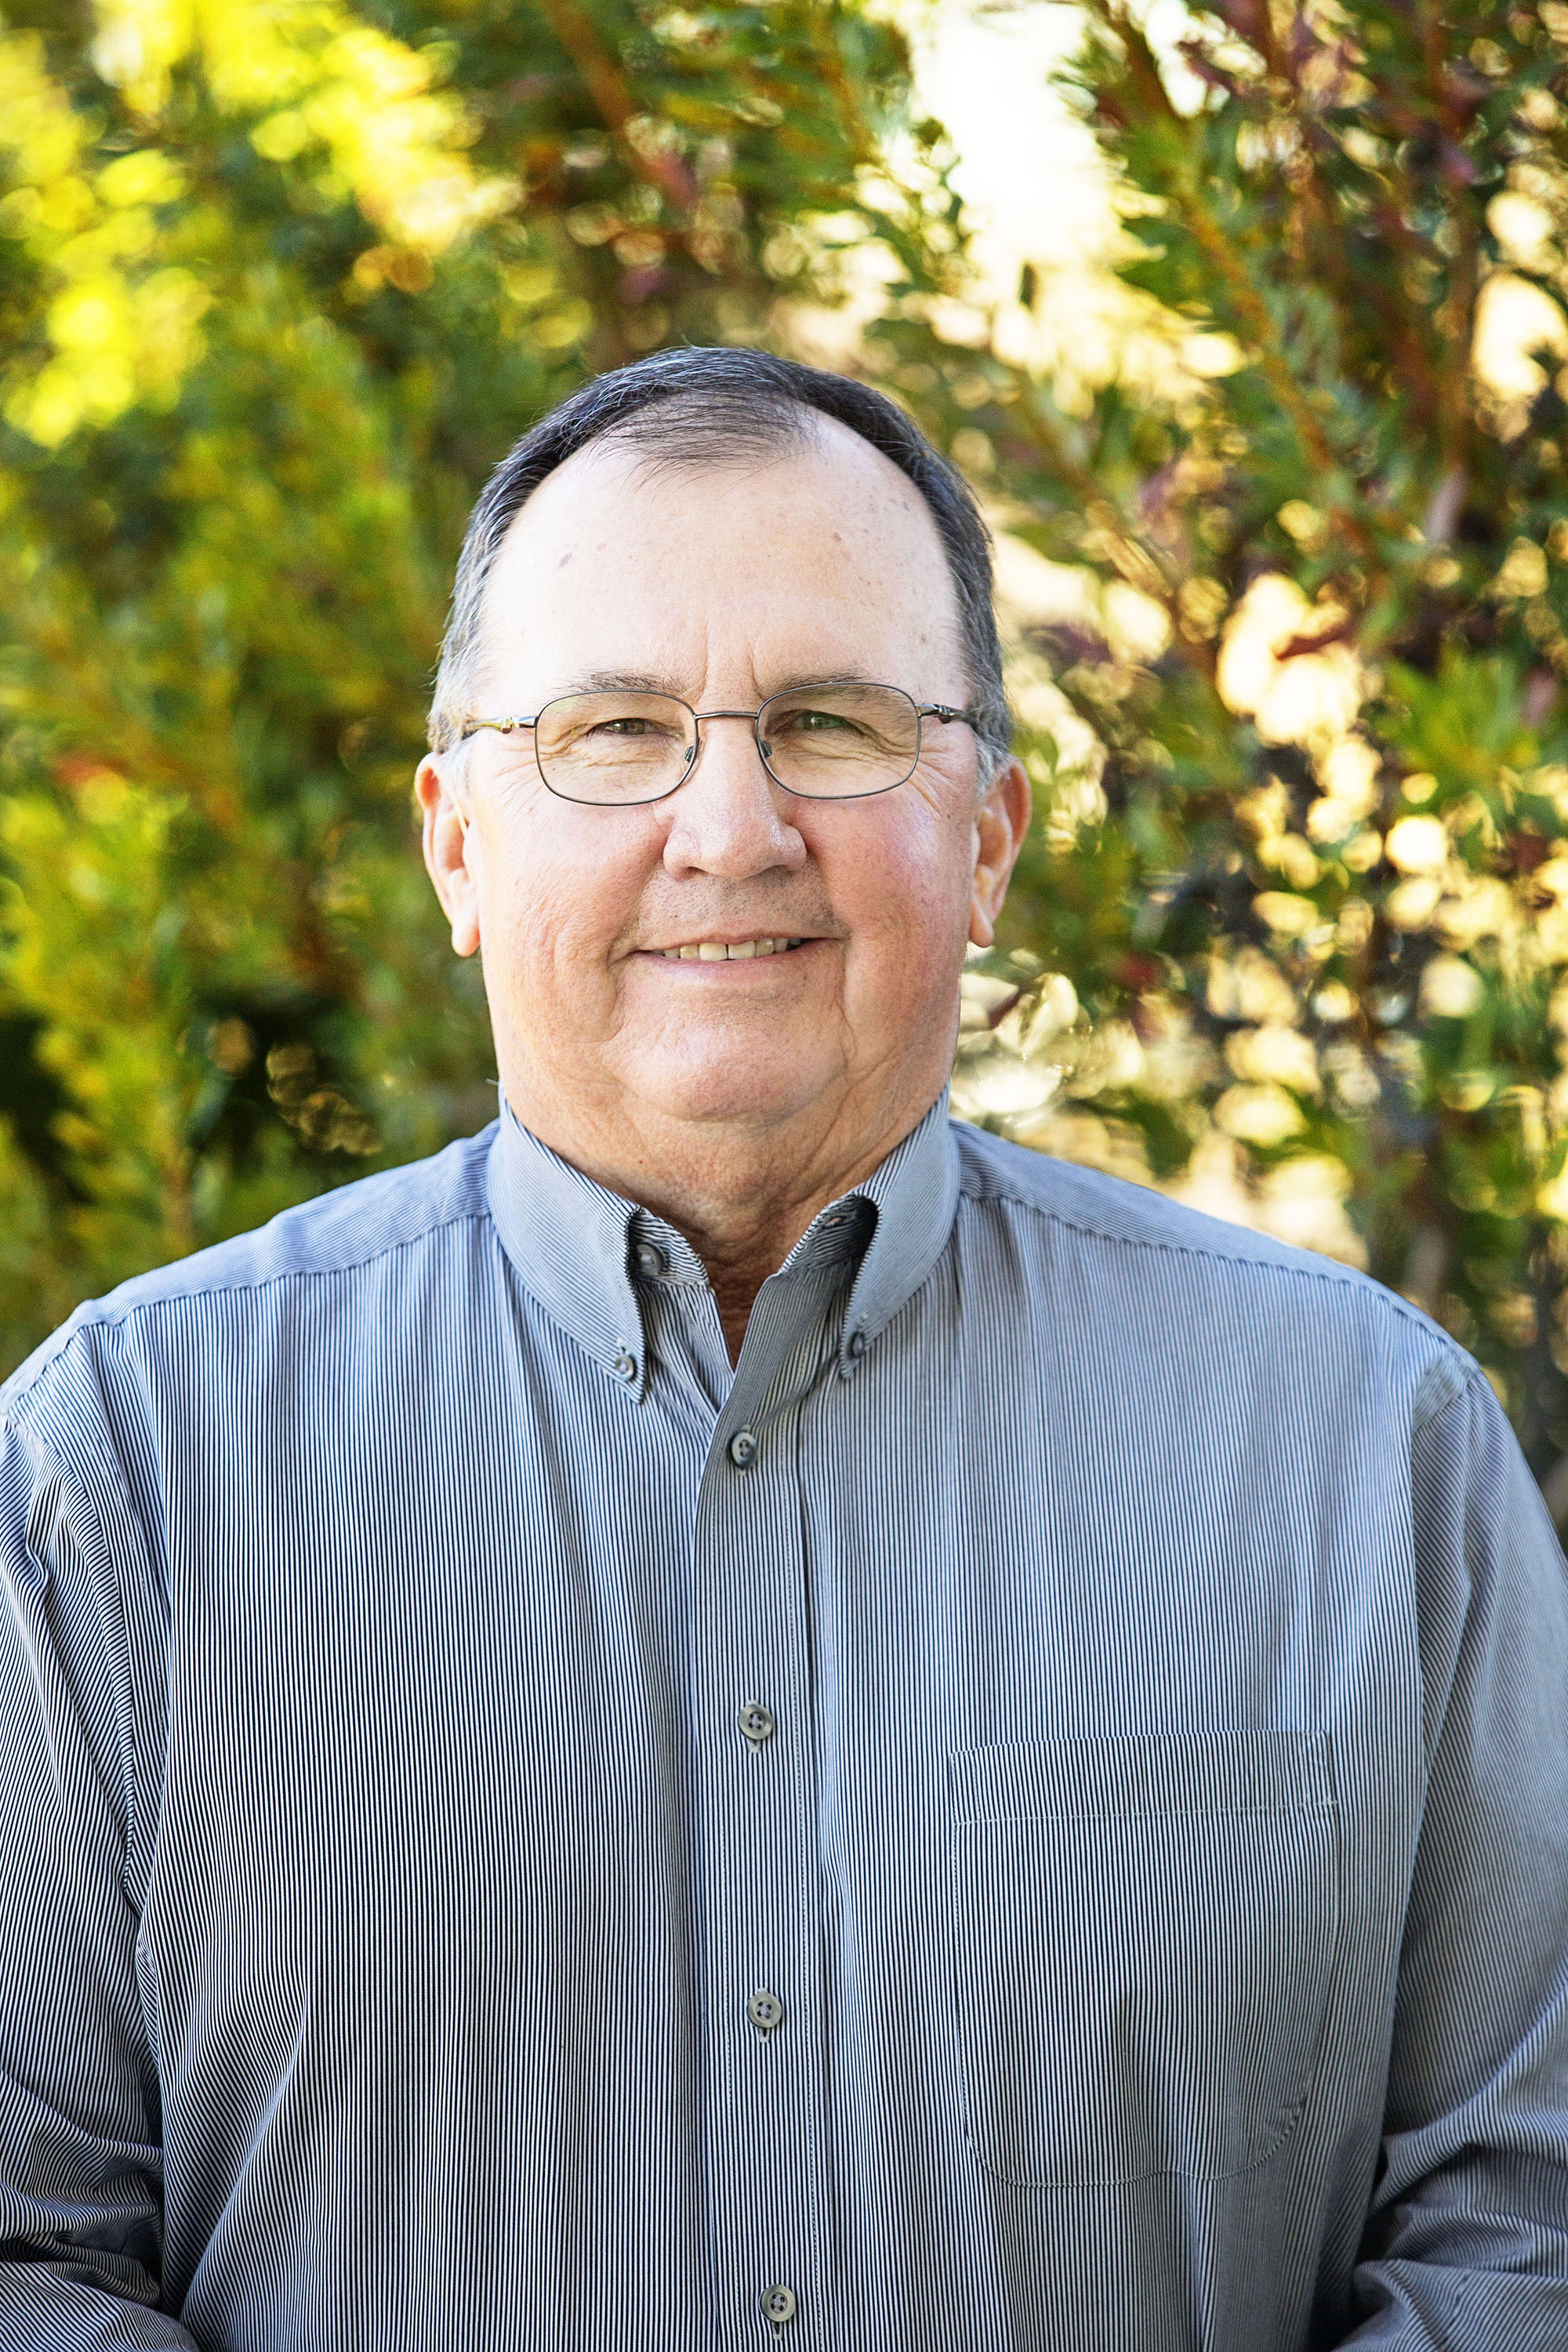 Central Texas Farm Credit stockholders re-elected Steven Lehrmann of Sagerton, Texas to the rural lending cooperative’s board of directors.